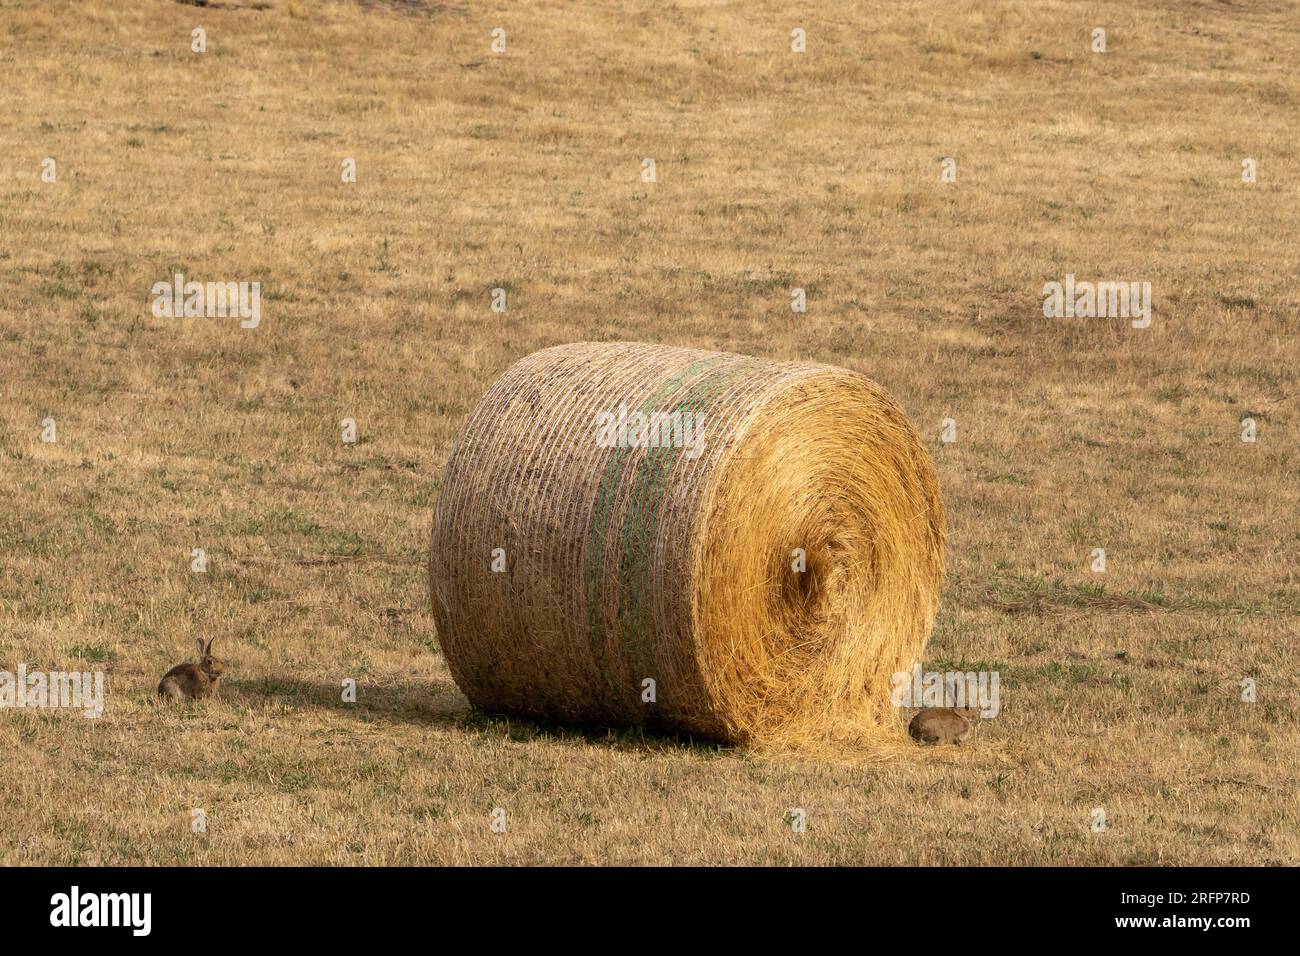 A pair of rabbits sheltering next to a large round hay bale in a dry summer paddock Stock Photo